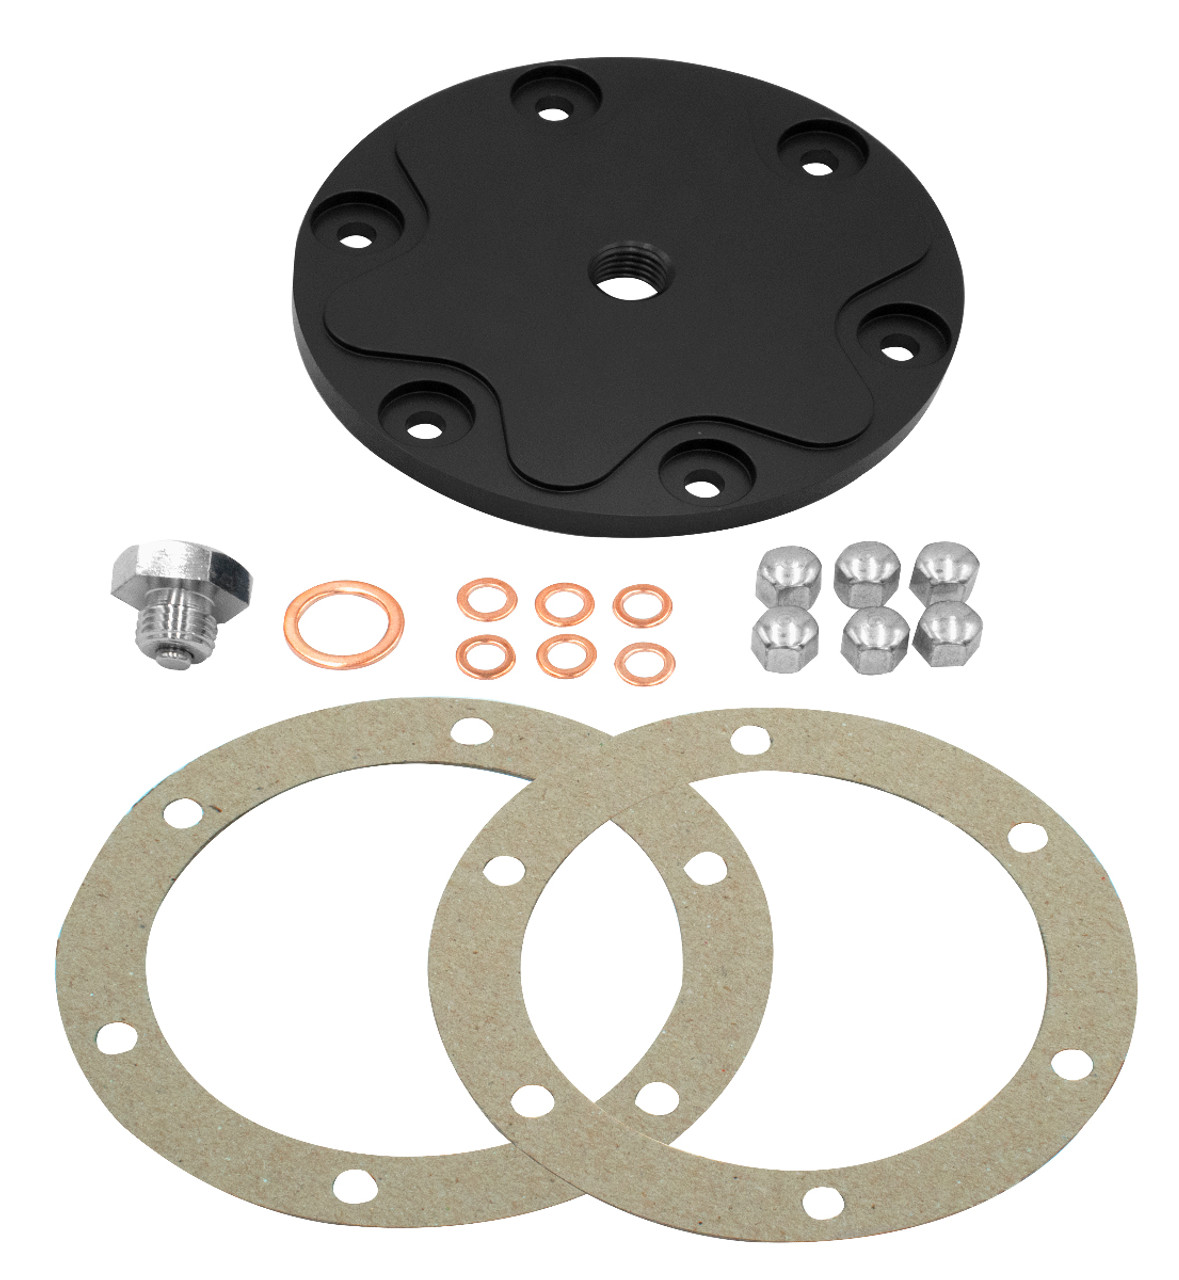 Engine Dress Up Kit, Black - Compatible with Volkswagen Air-Cooled Vehicles